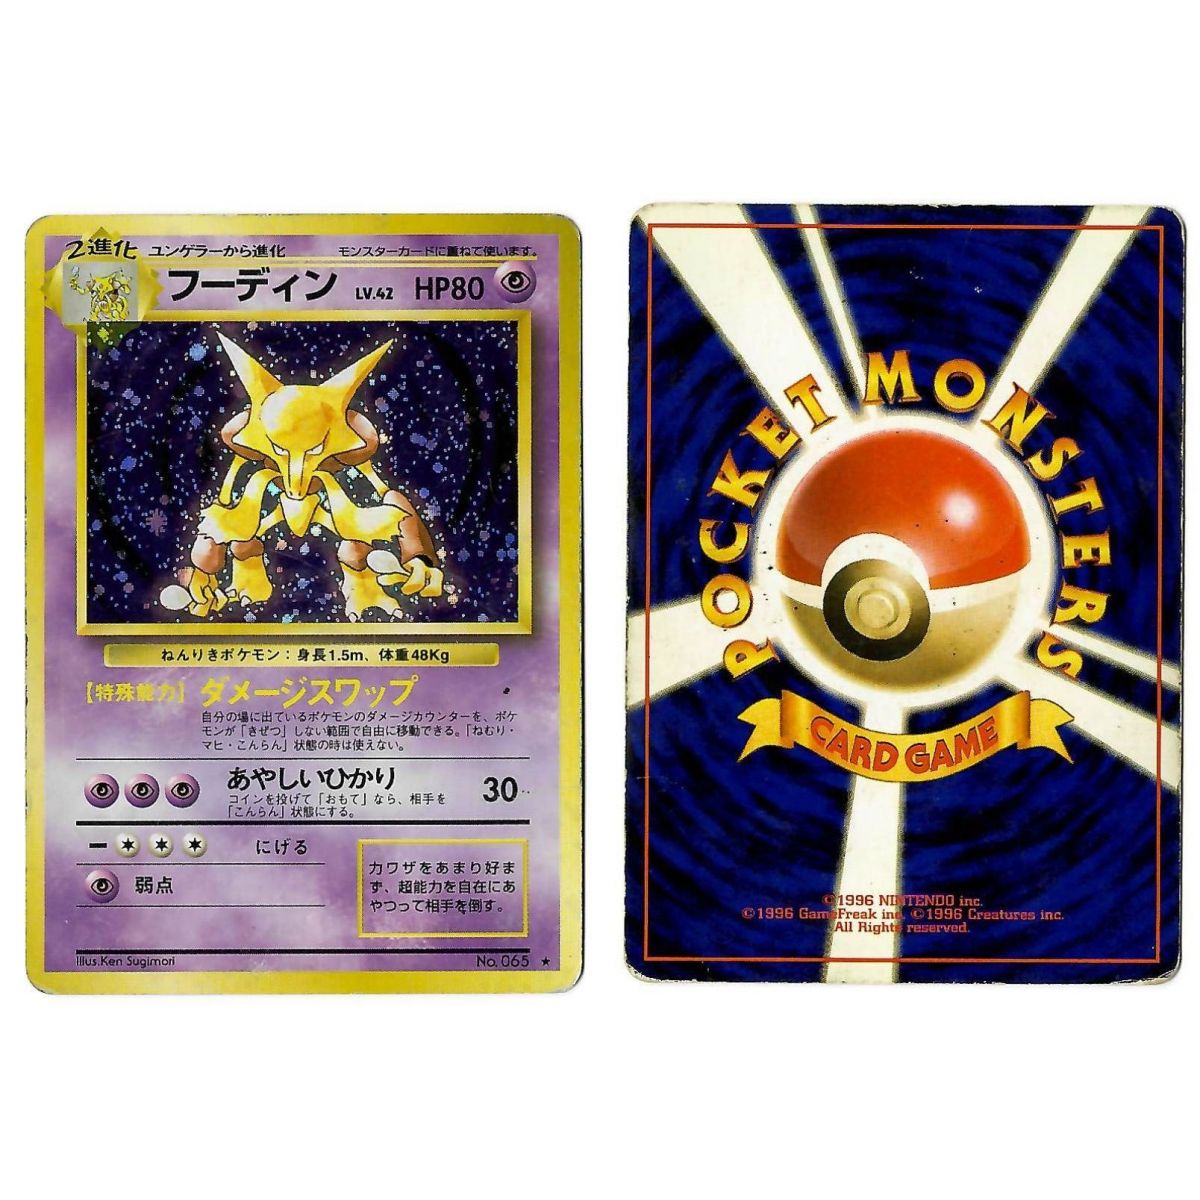 Item Alakazam (2) No.066 Expansion Pack BS Holo Unlimited Japanese View Scan